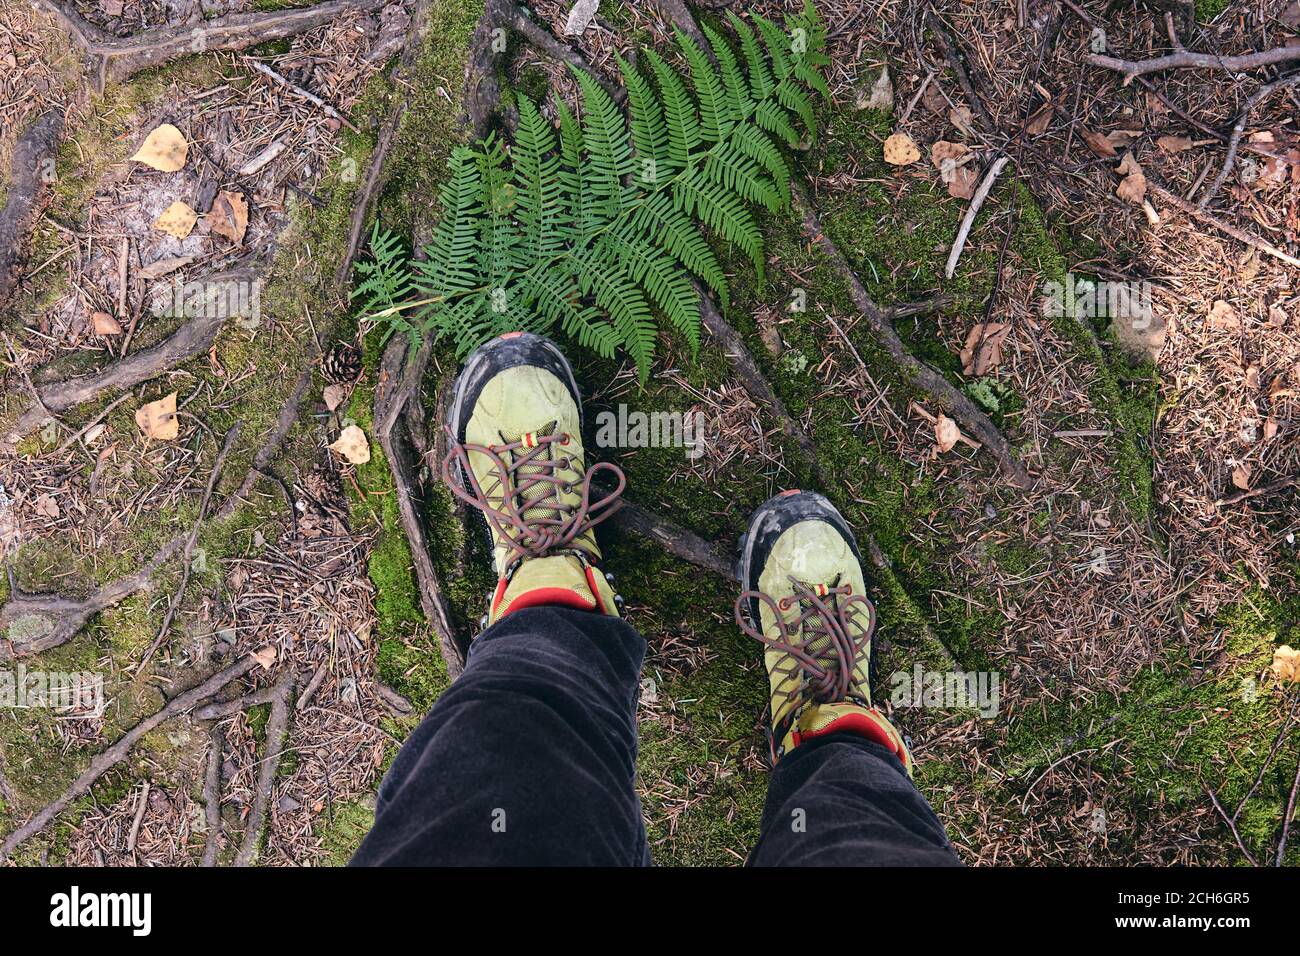 Hiking boots in outdoor action. Top View of Boot on the trail. Close-up Legs In Jeans And sport trekking shoes on rocky srones of Mountain river Stock Photo